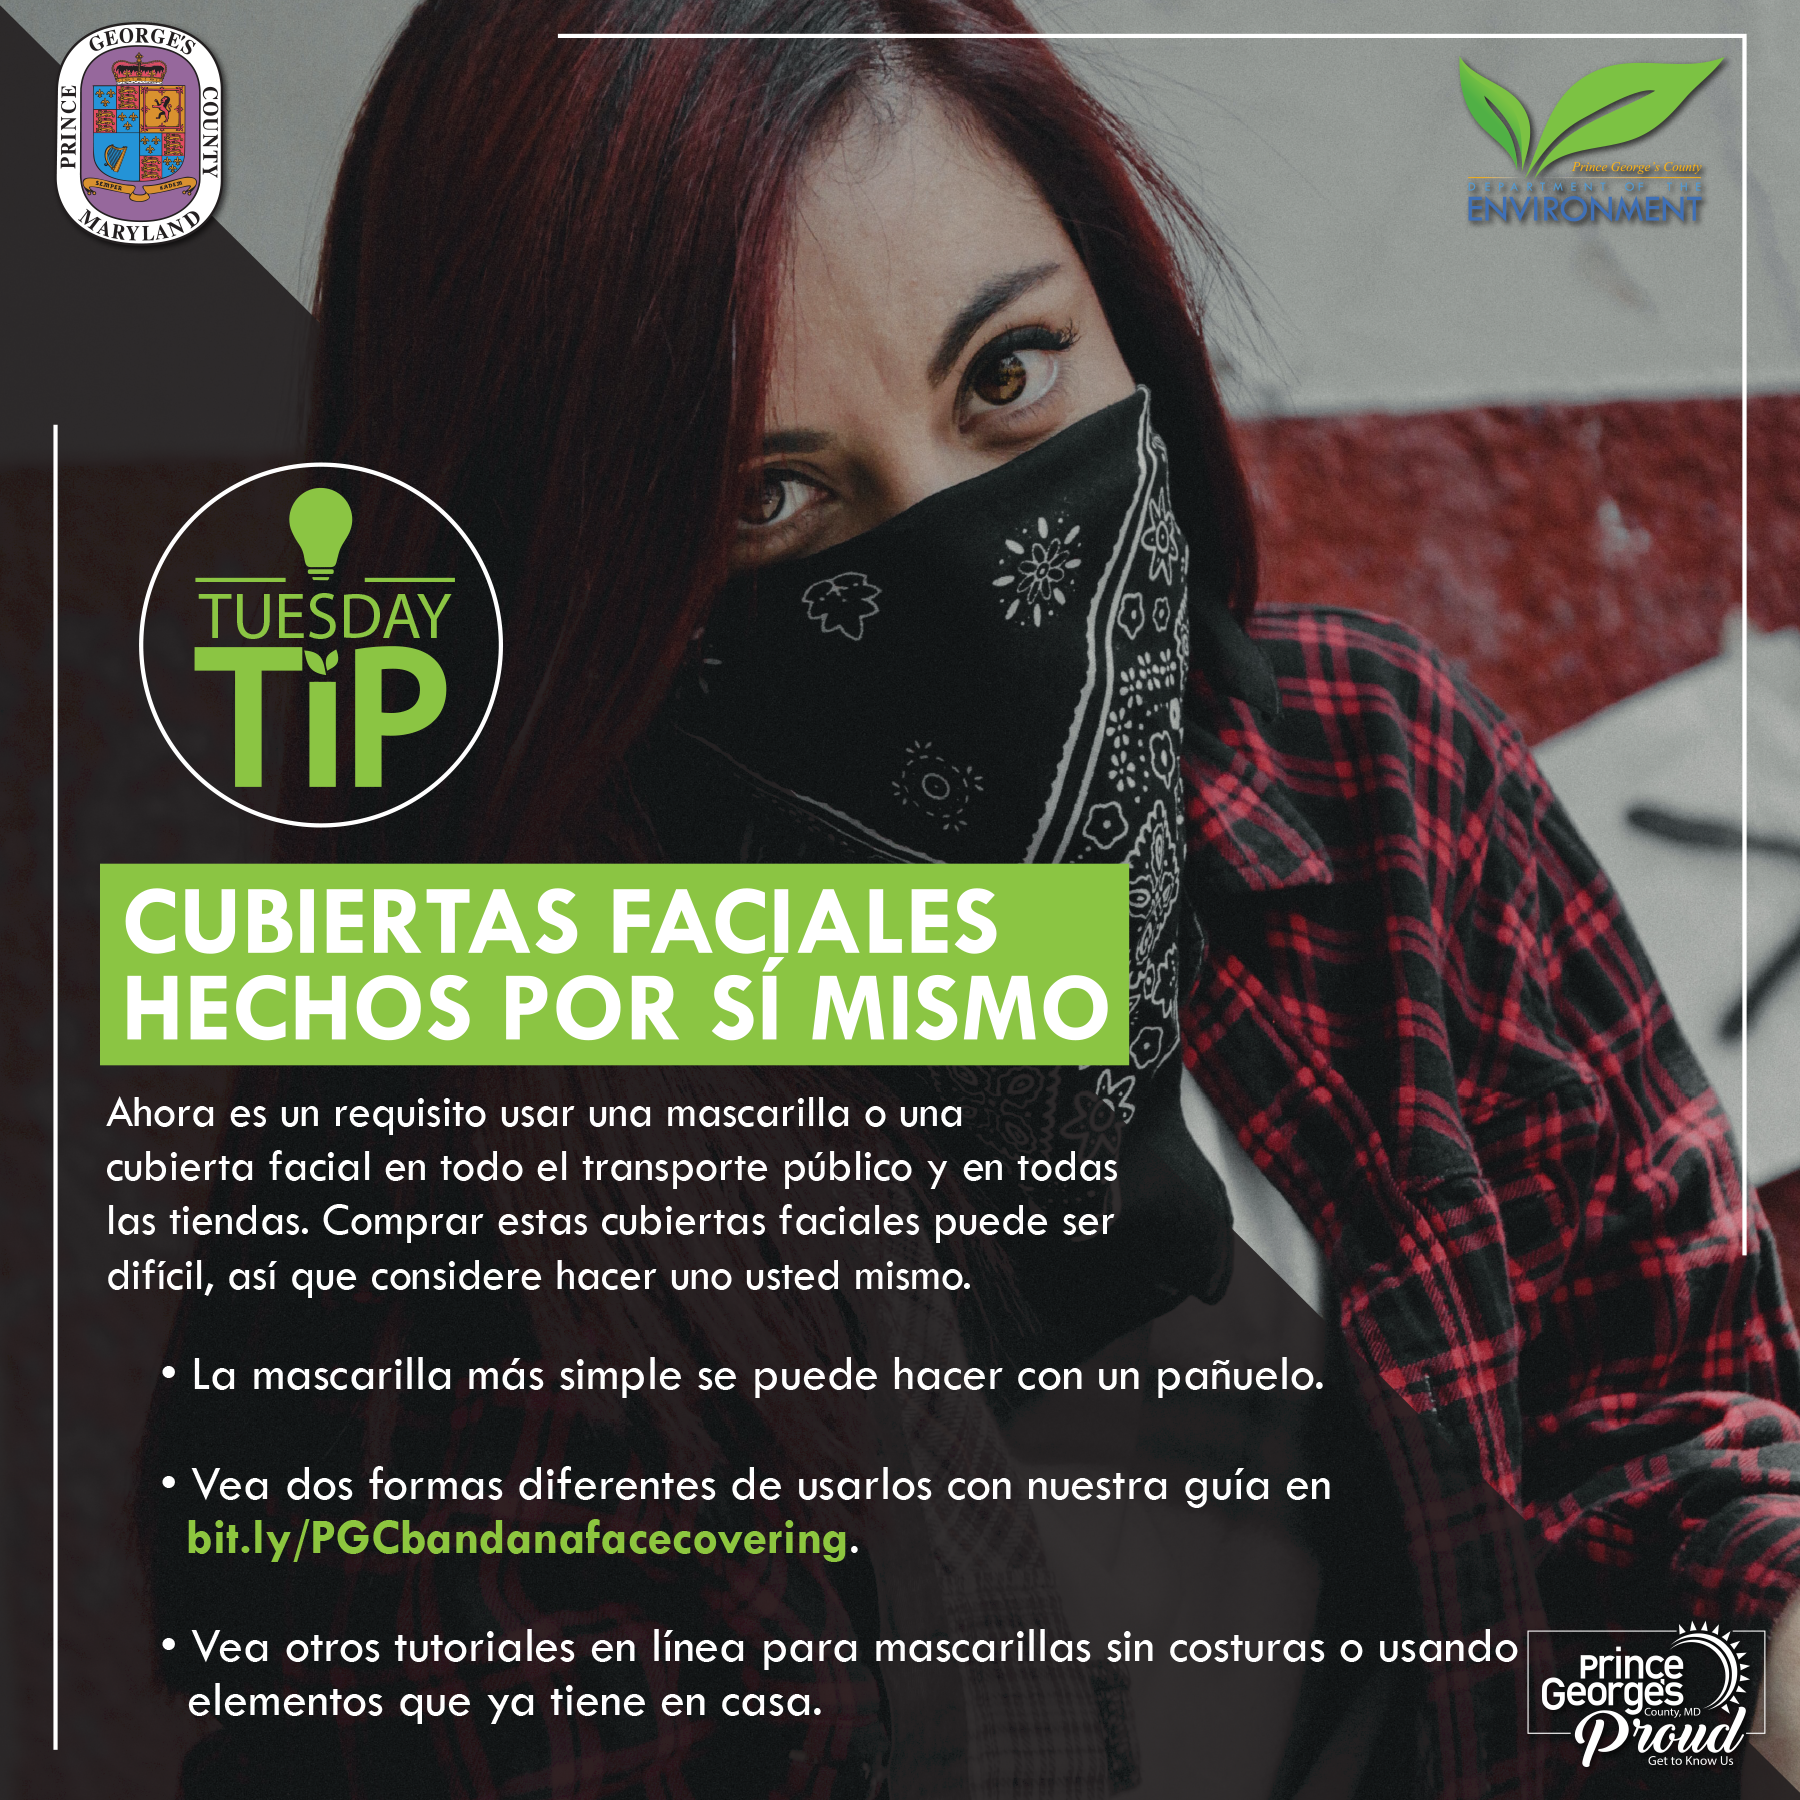 Tues Tip 4.28.20 DIY face covering spanish